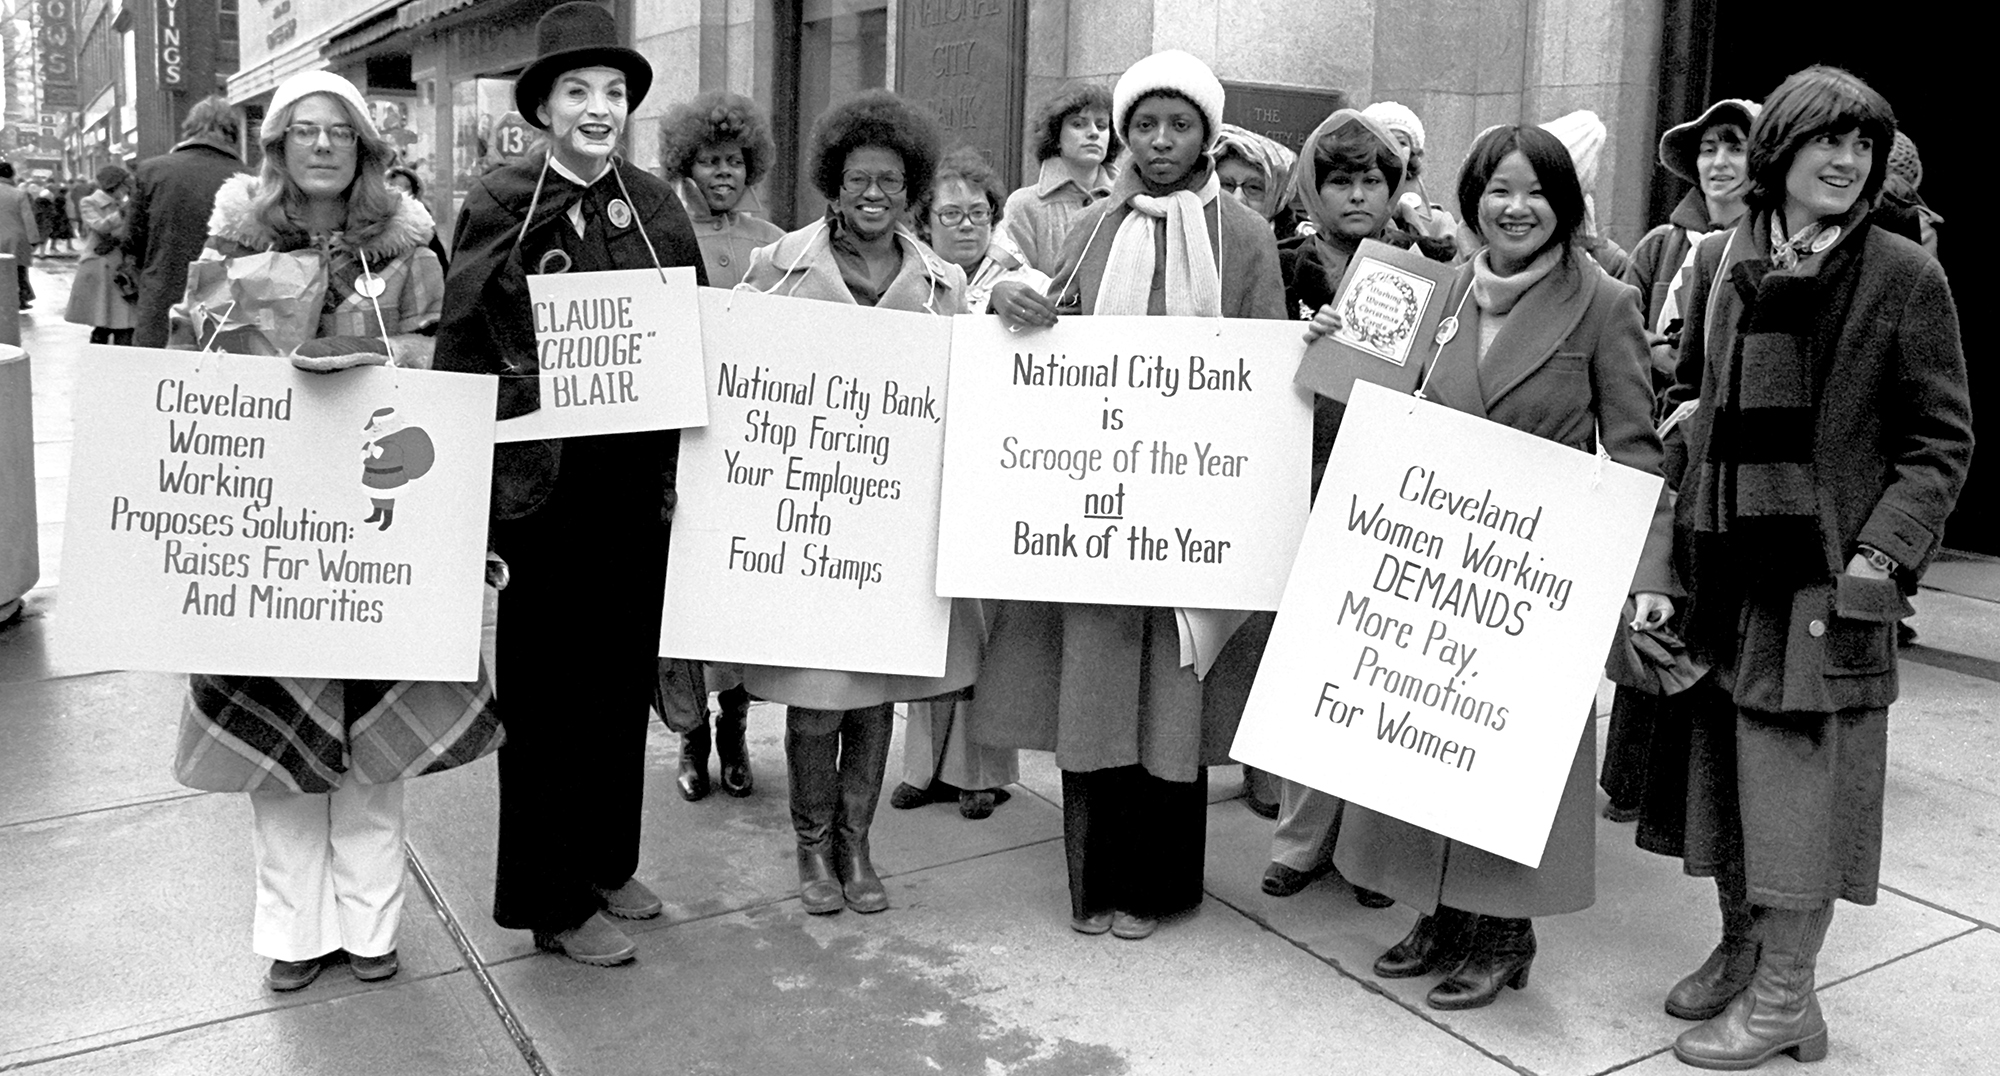 A 1970s 9to5 protest against National City Bank